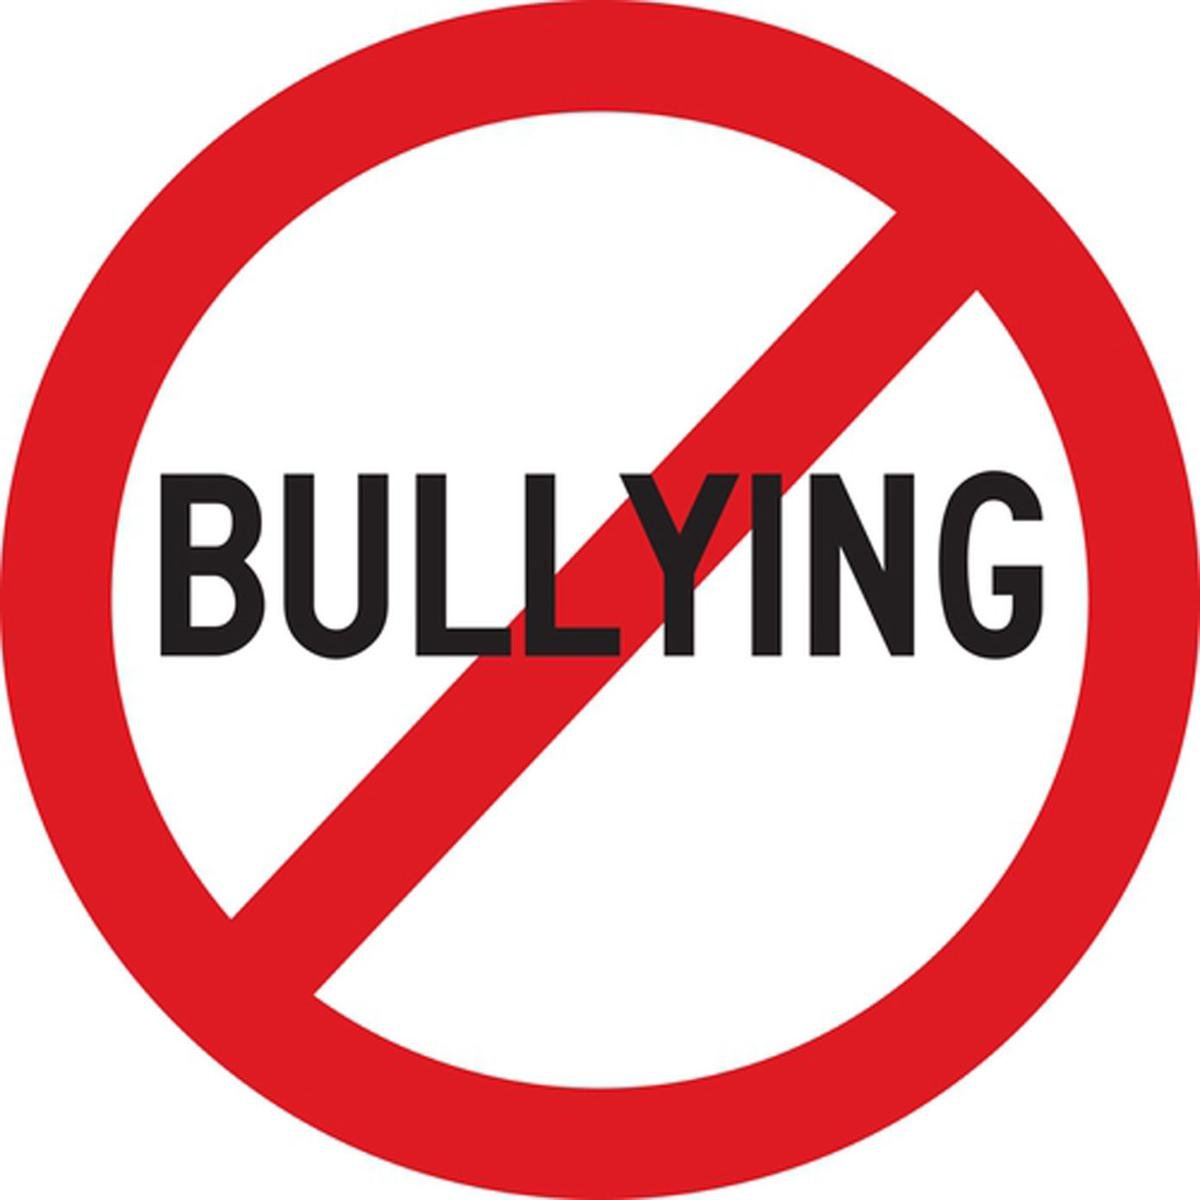 EDITORIAL We're too good to let bullying continue in our schools